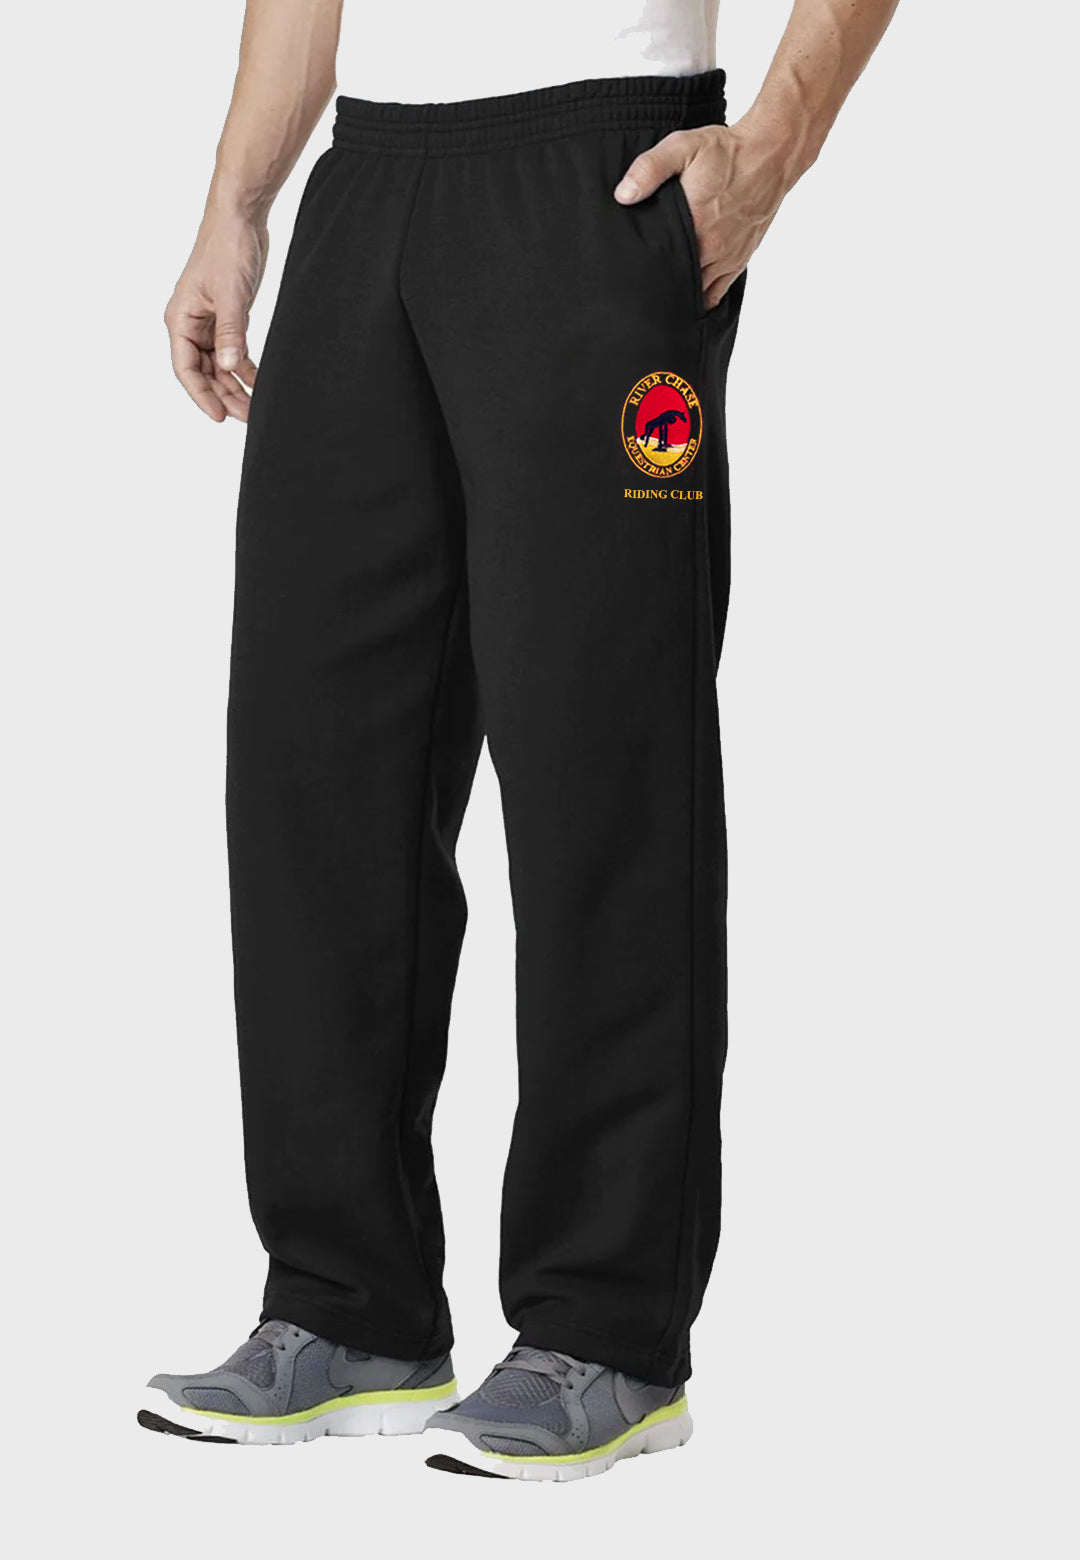 River Chase Equestrian Center Core Fleece Sweat pants with Pockets - Adult Unisex + Youth Sizes, Black